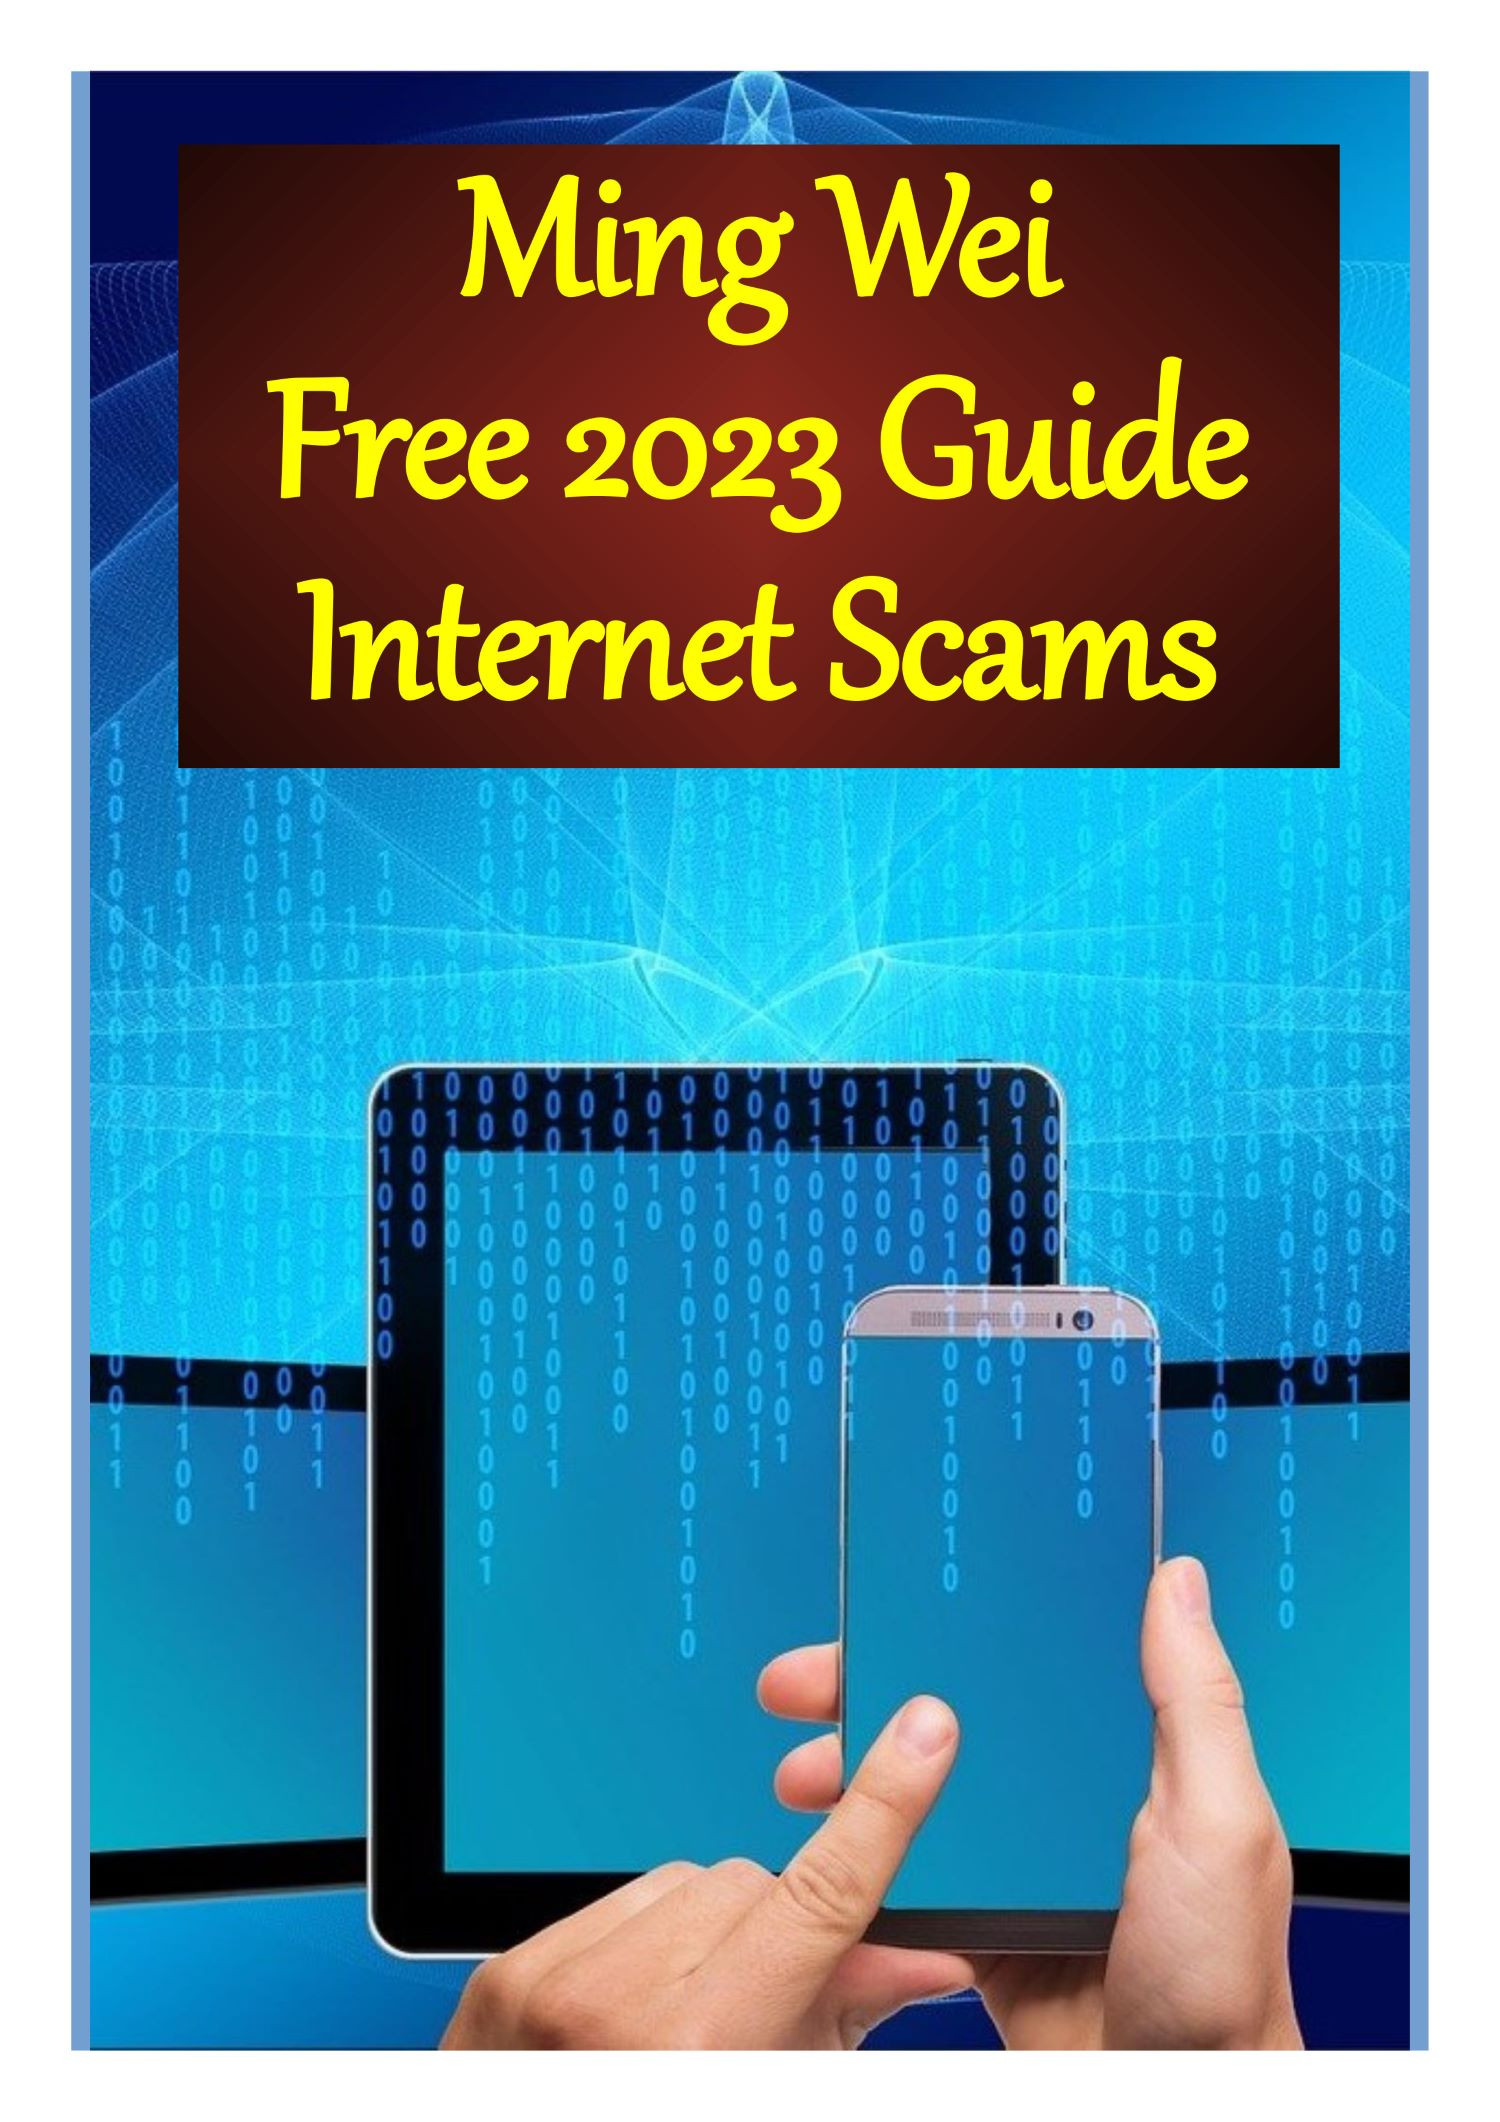 Free 2023 Guide Internet Scams